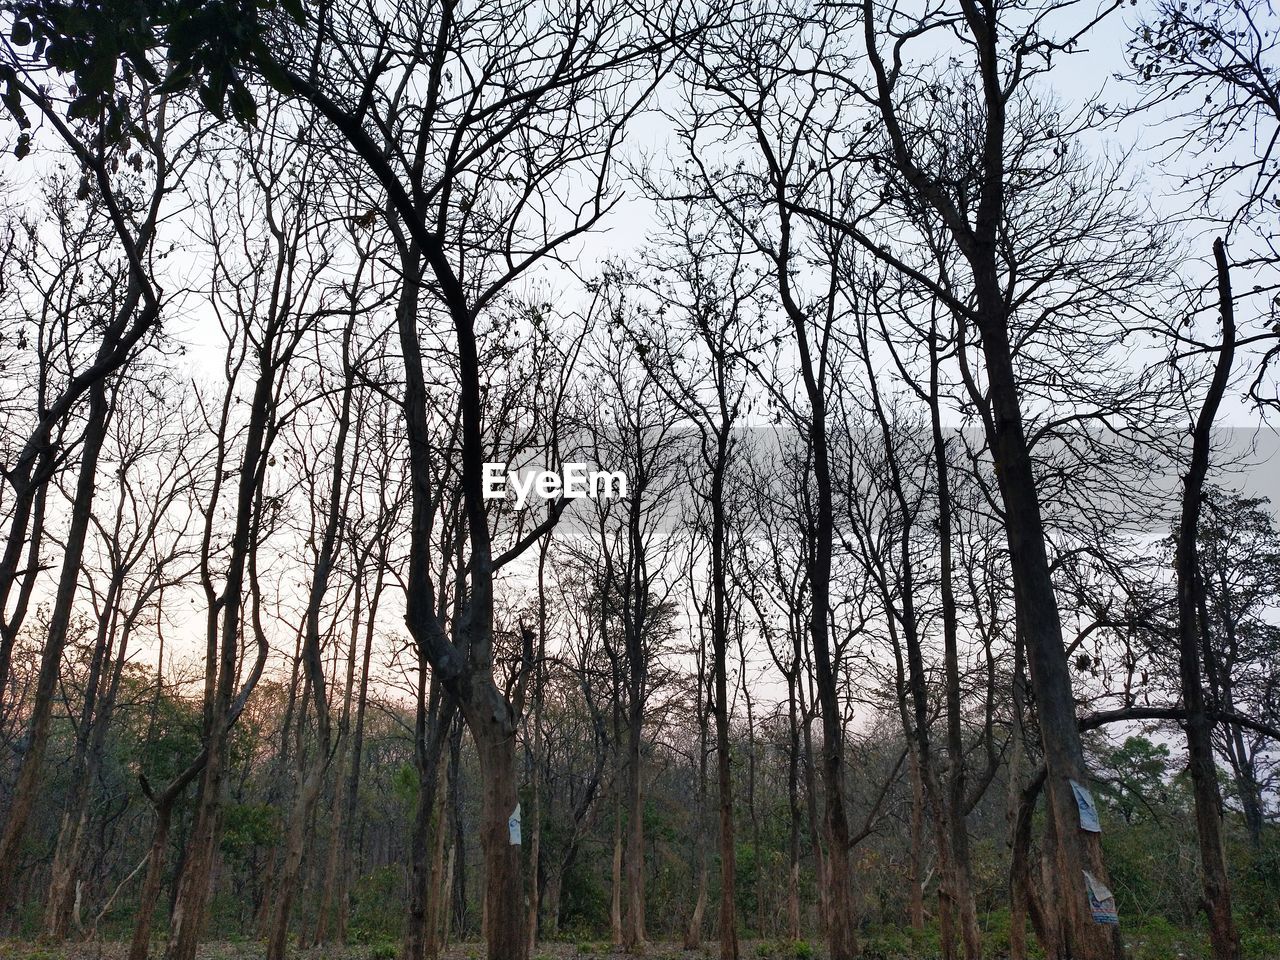 VIEW OF BARE TREES IN FOREST